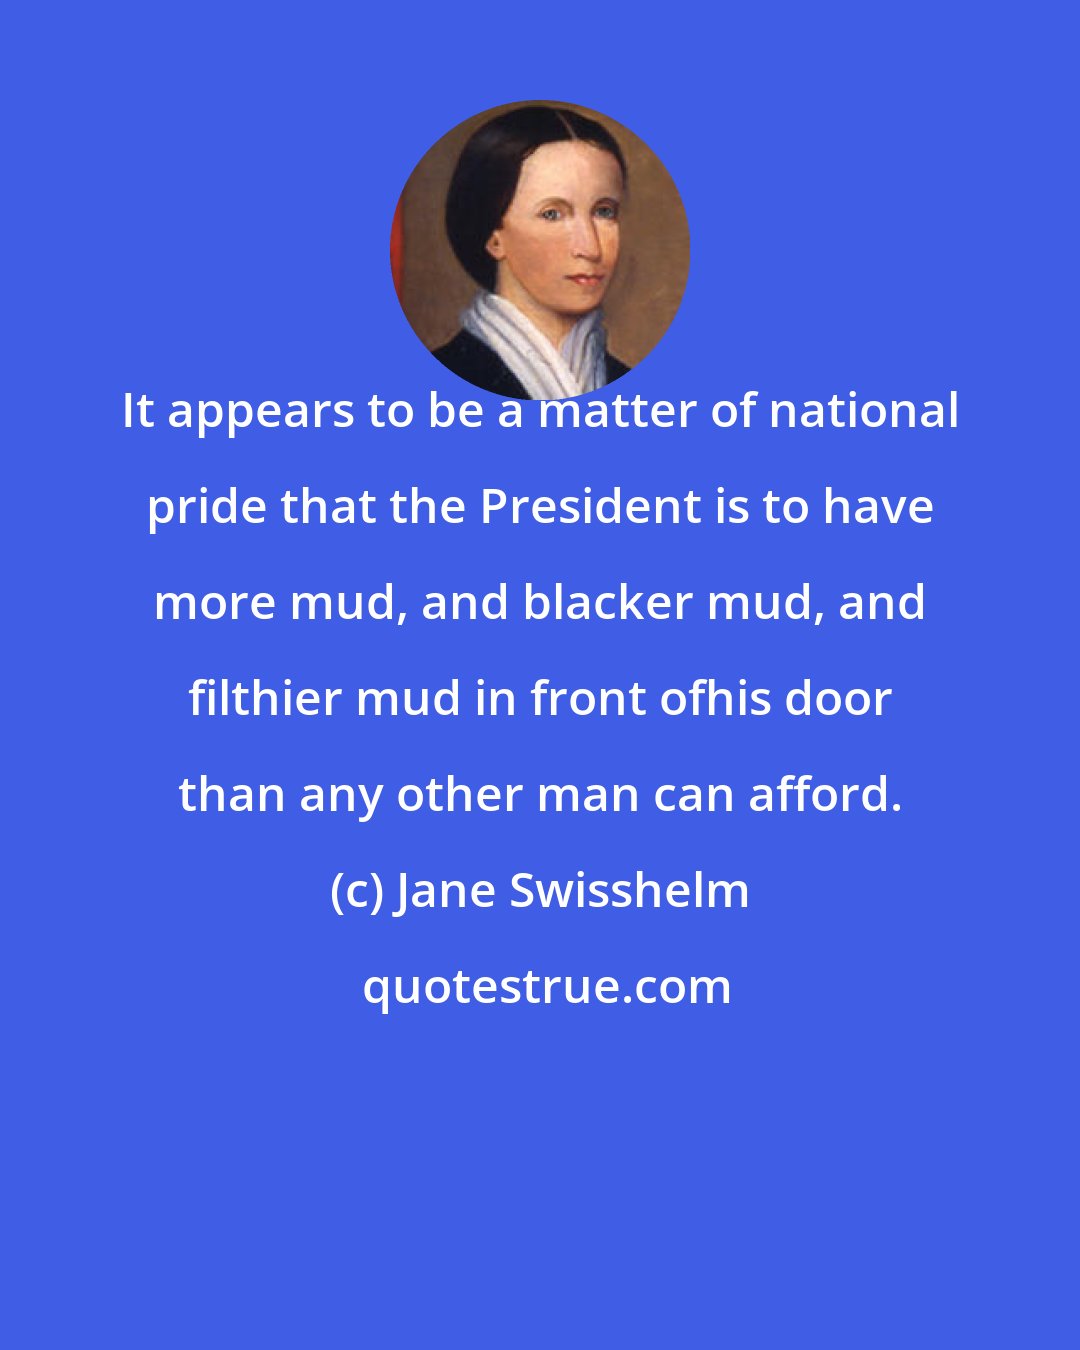 Jane Swisshelm: It appears to be a matter of national pride that the President is to have more mud, and blacker mud, and filthier mud in front ofhis door than any other man can afford.